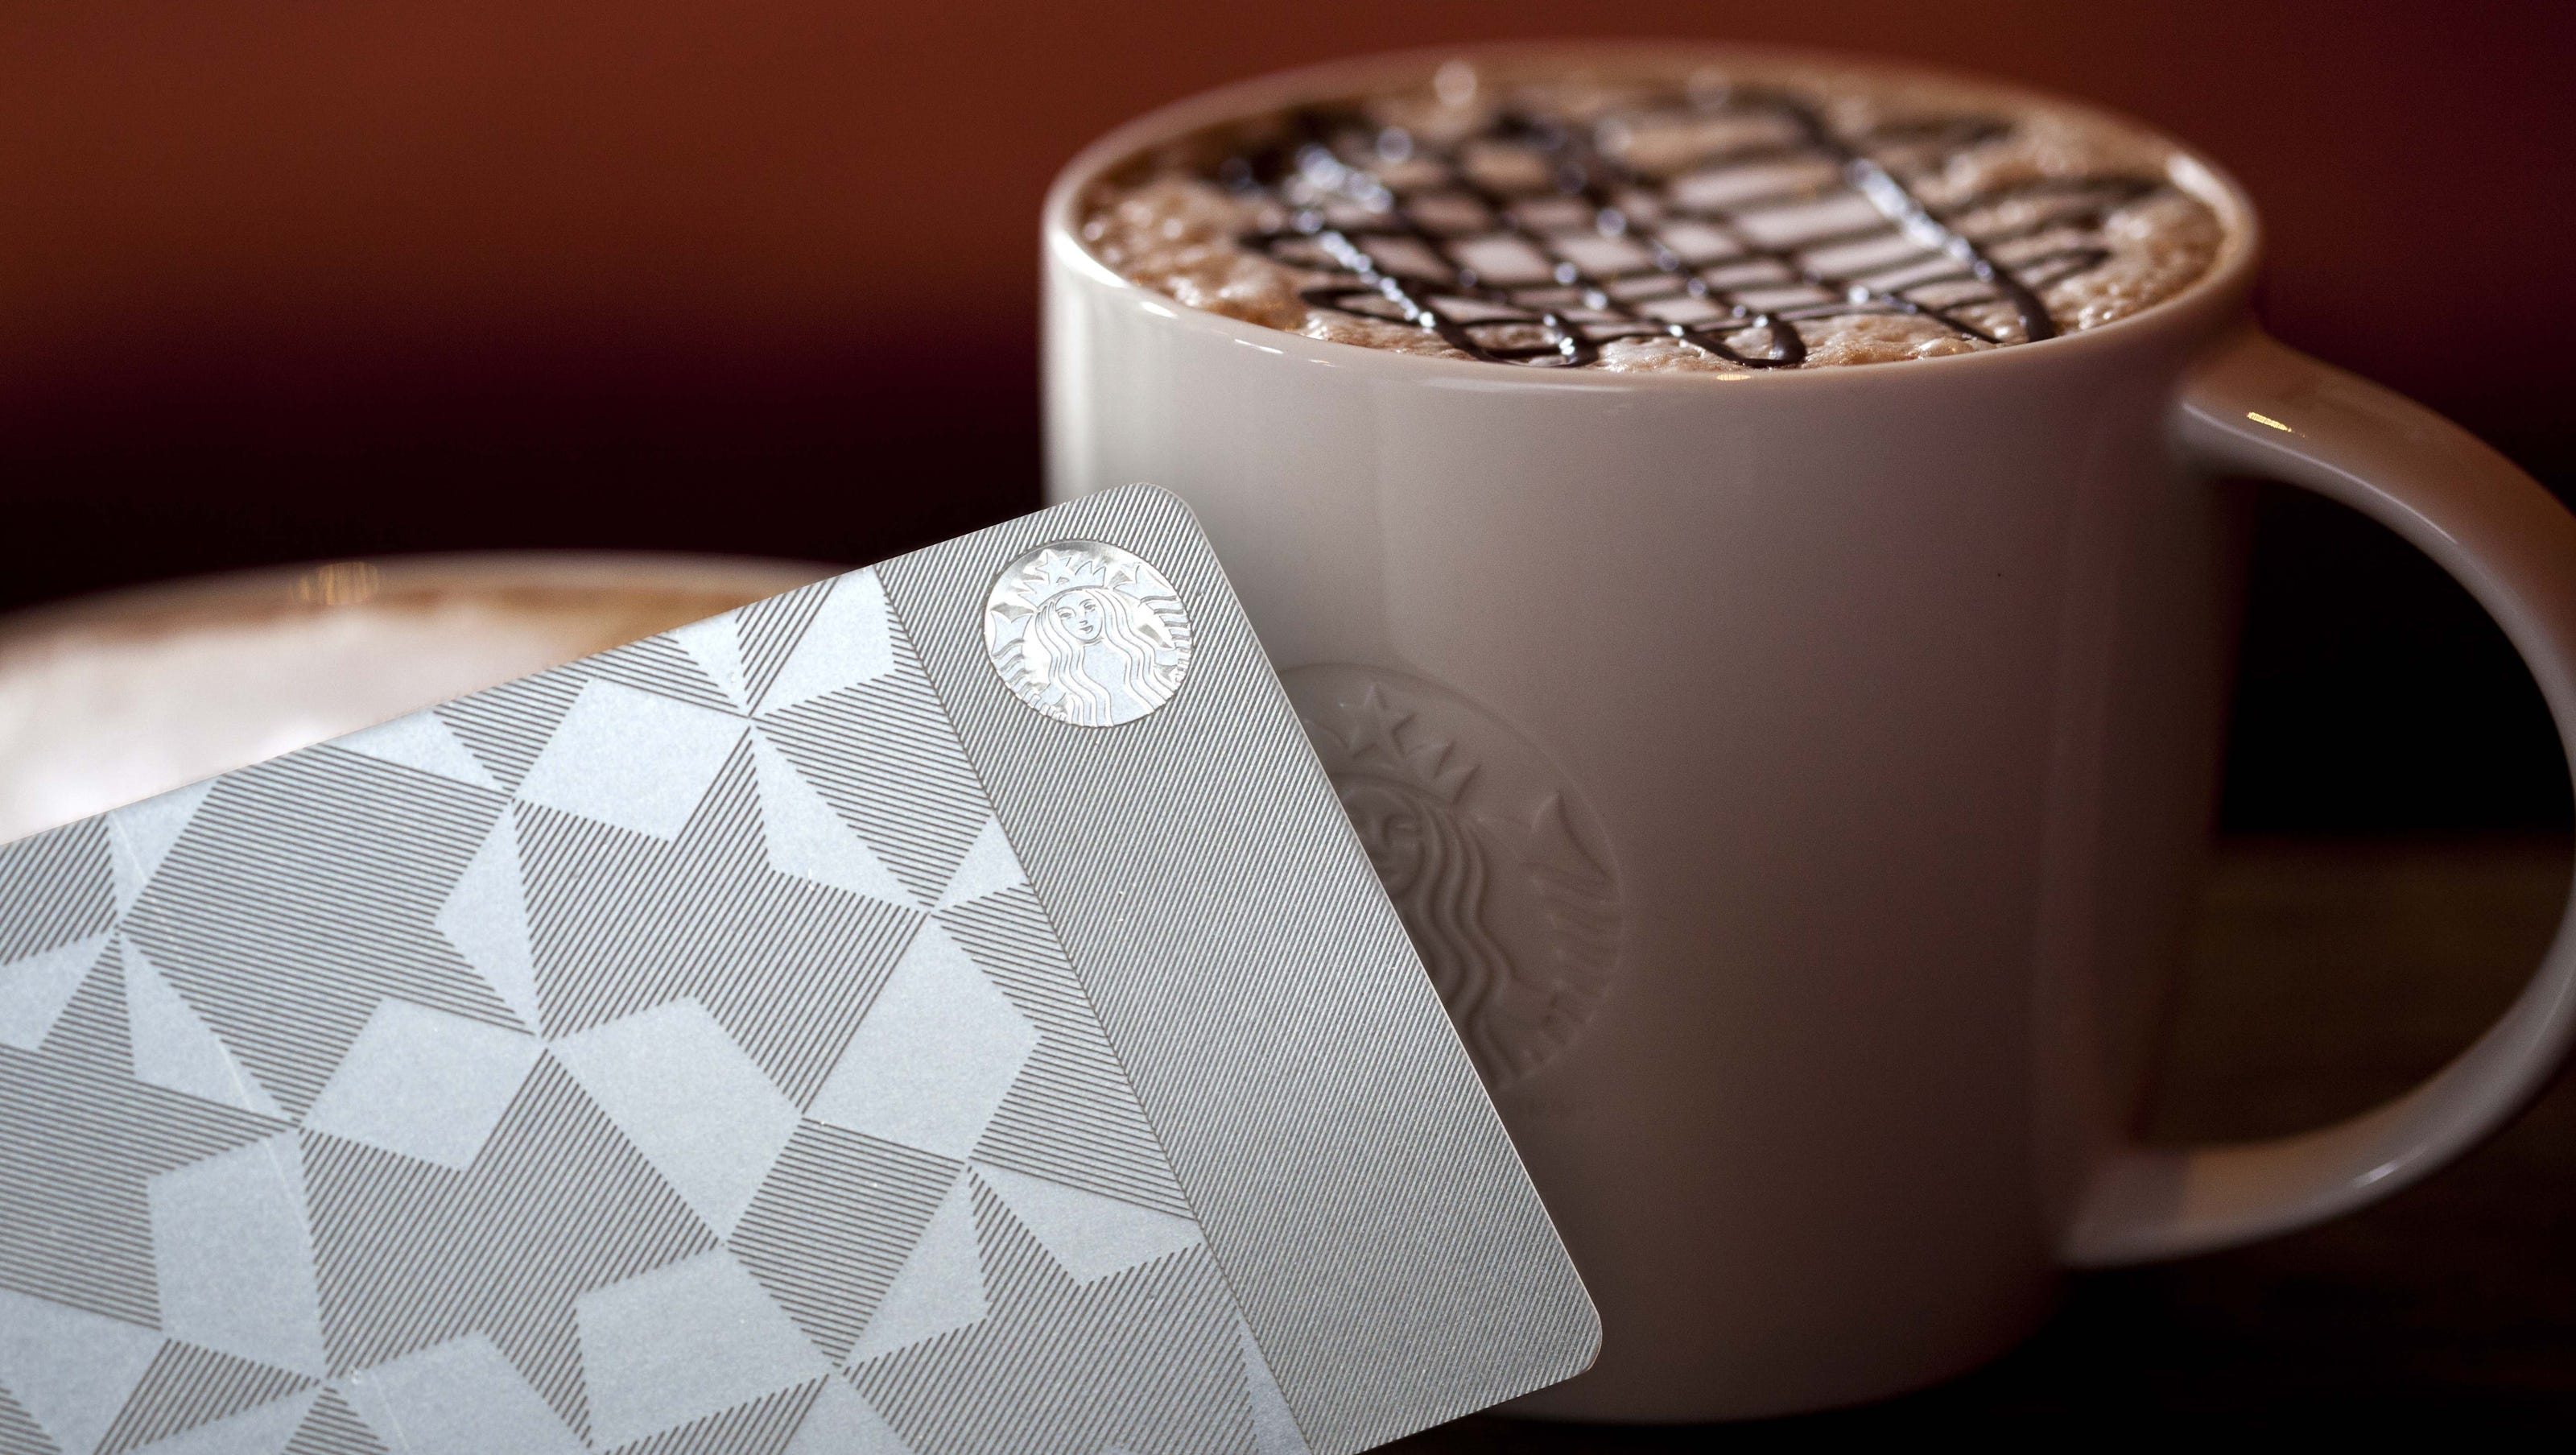 starbucks-rolls-out-limited-450-gift-card